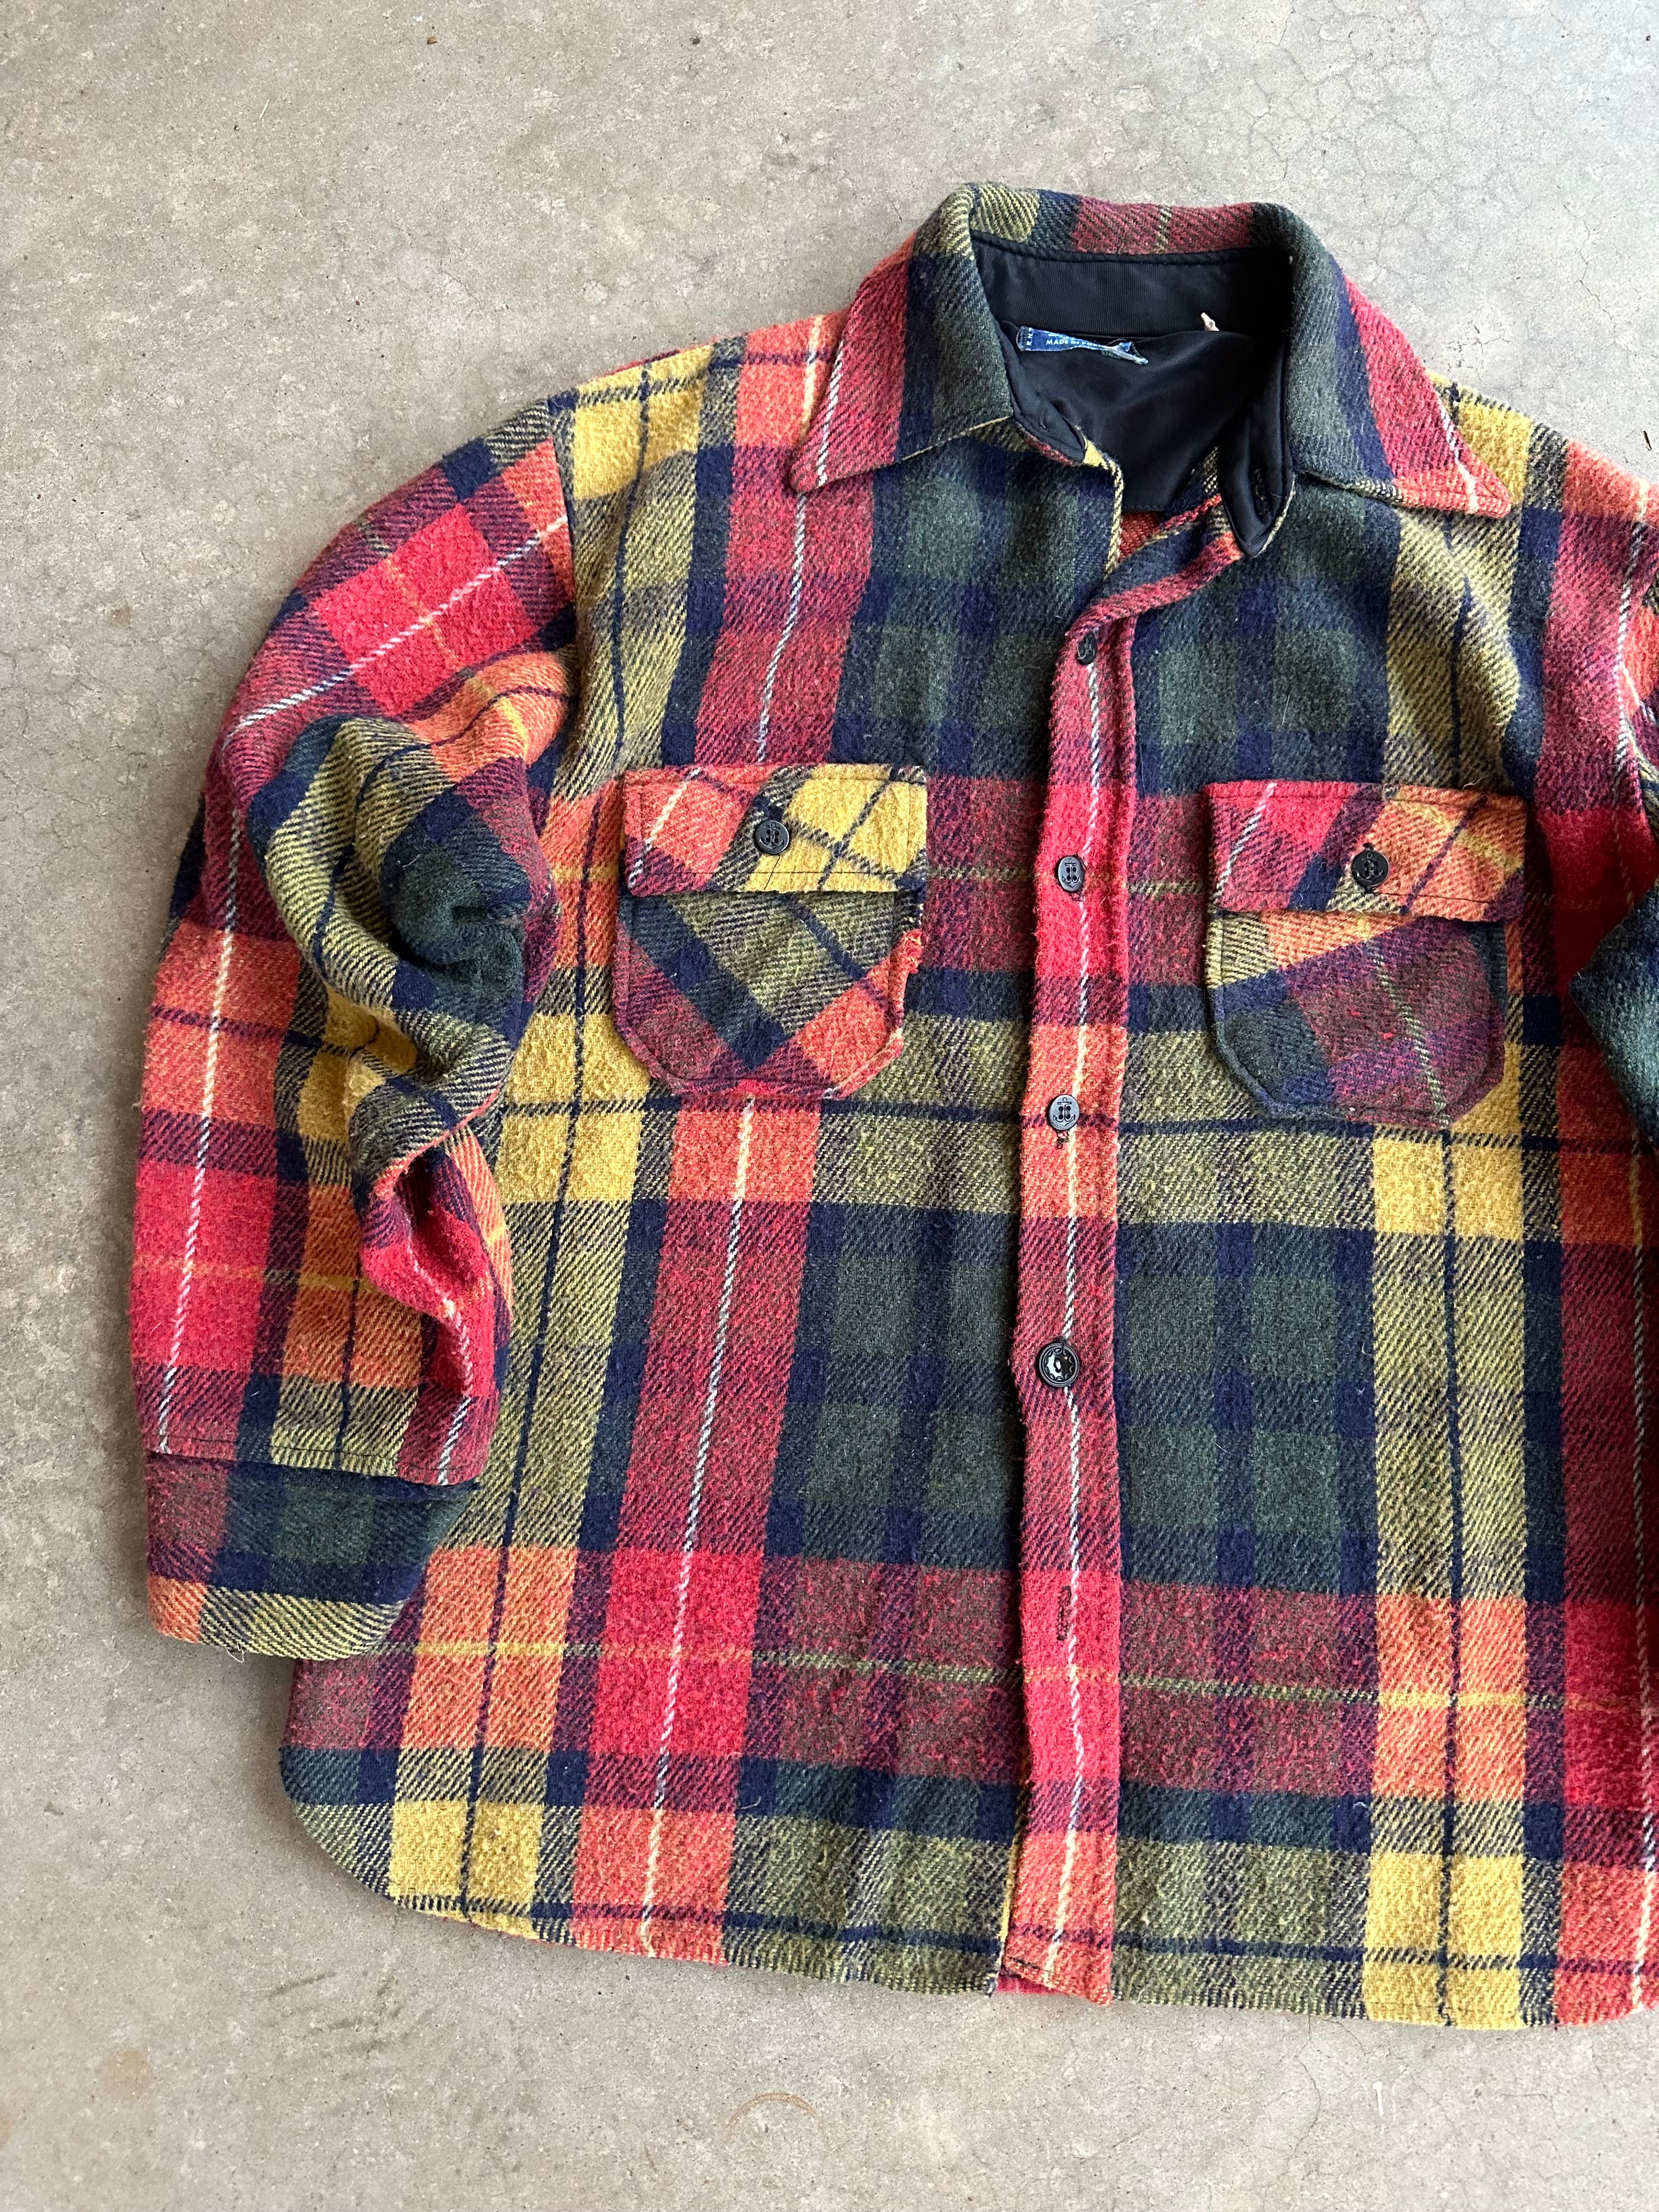 1970s Brewster Thick Wool Flannel (L)